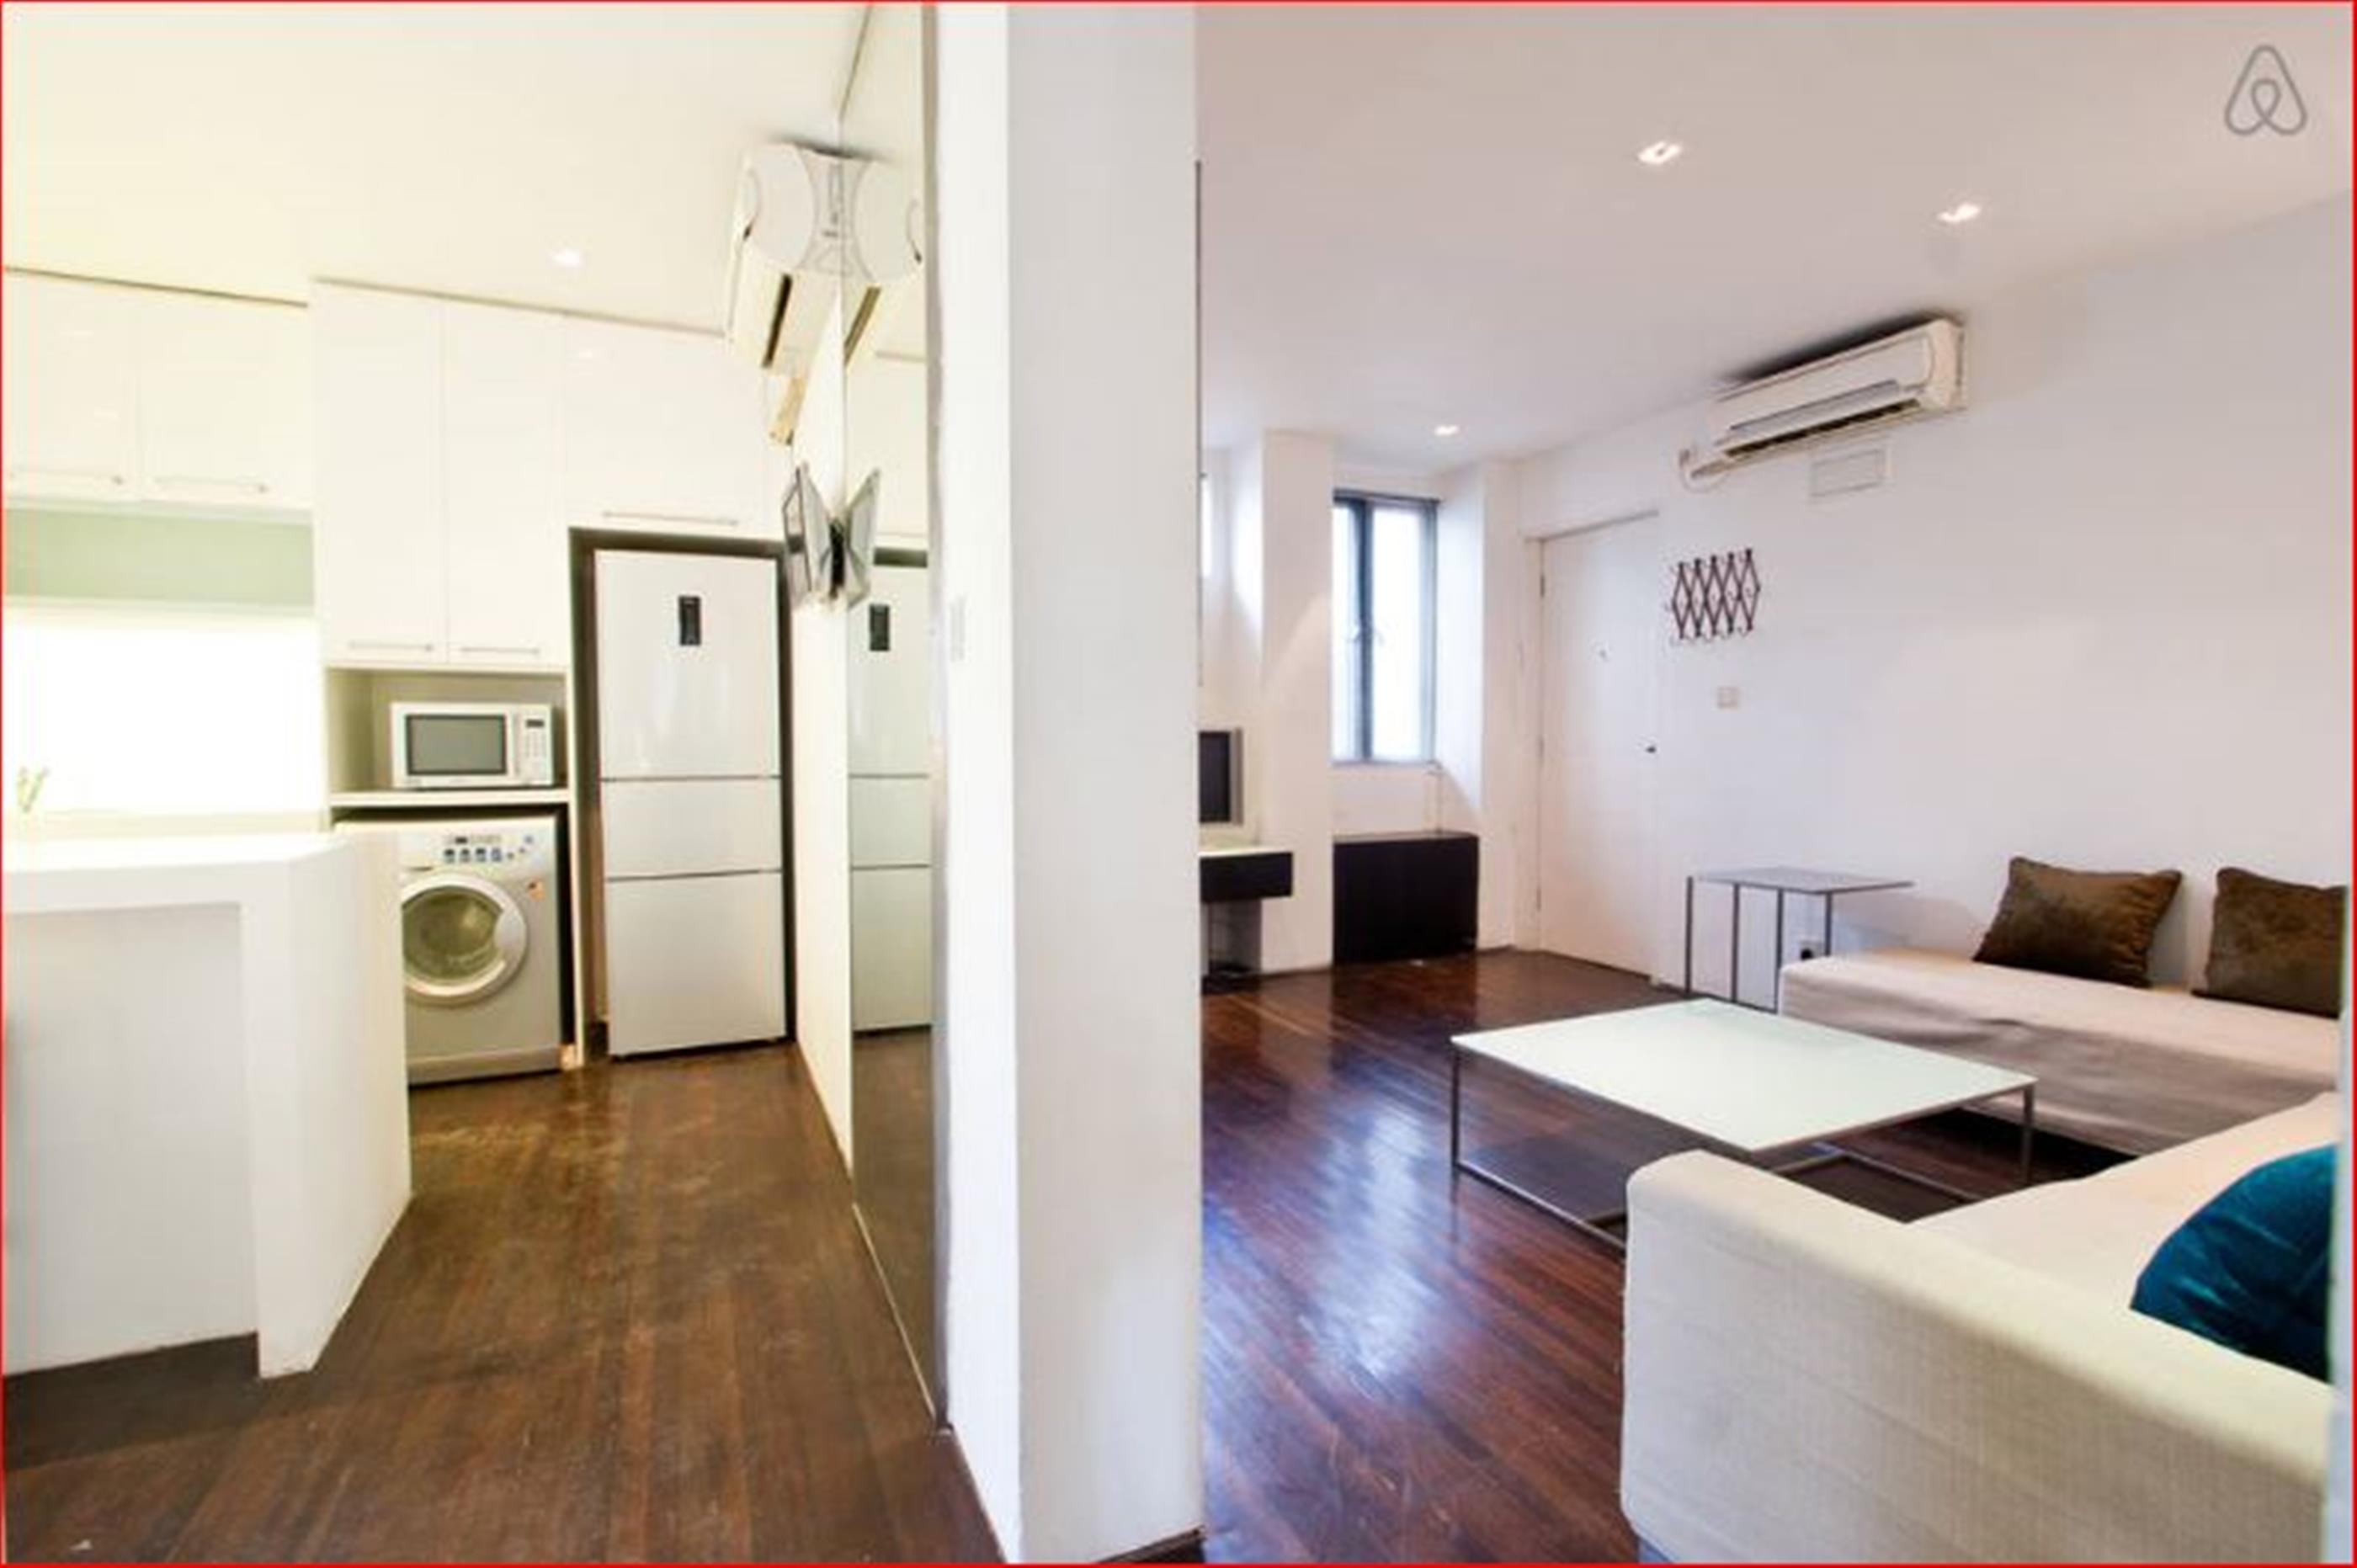 large rooms Renovated Bright Spacious Modern FFC 1BR Apt nr LN1/2/7/10/11 in Shanghai for Rent